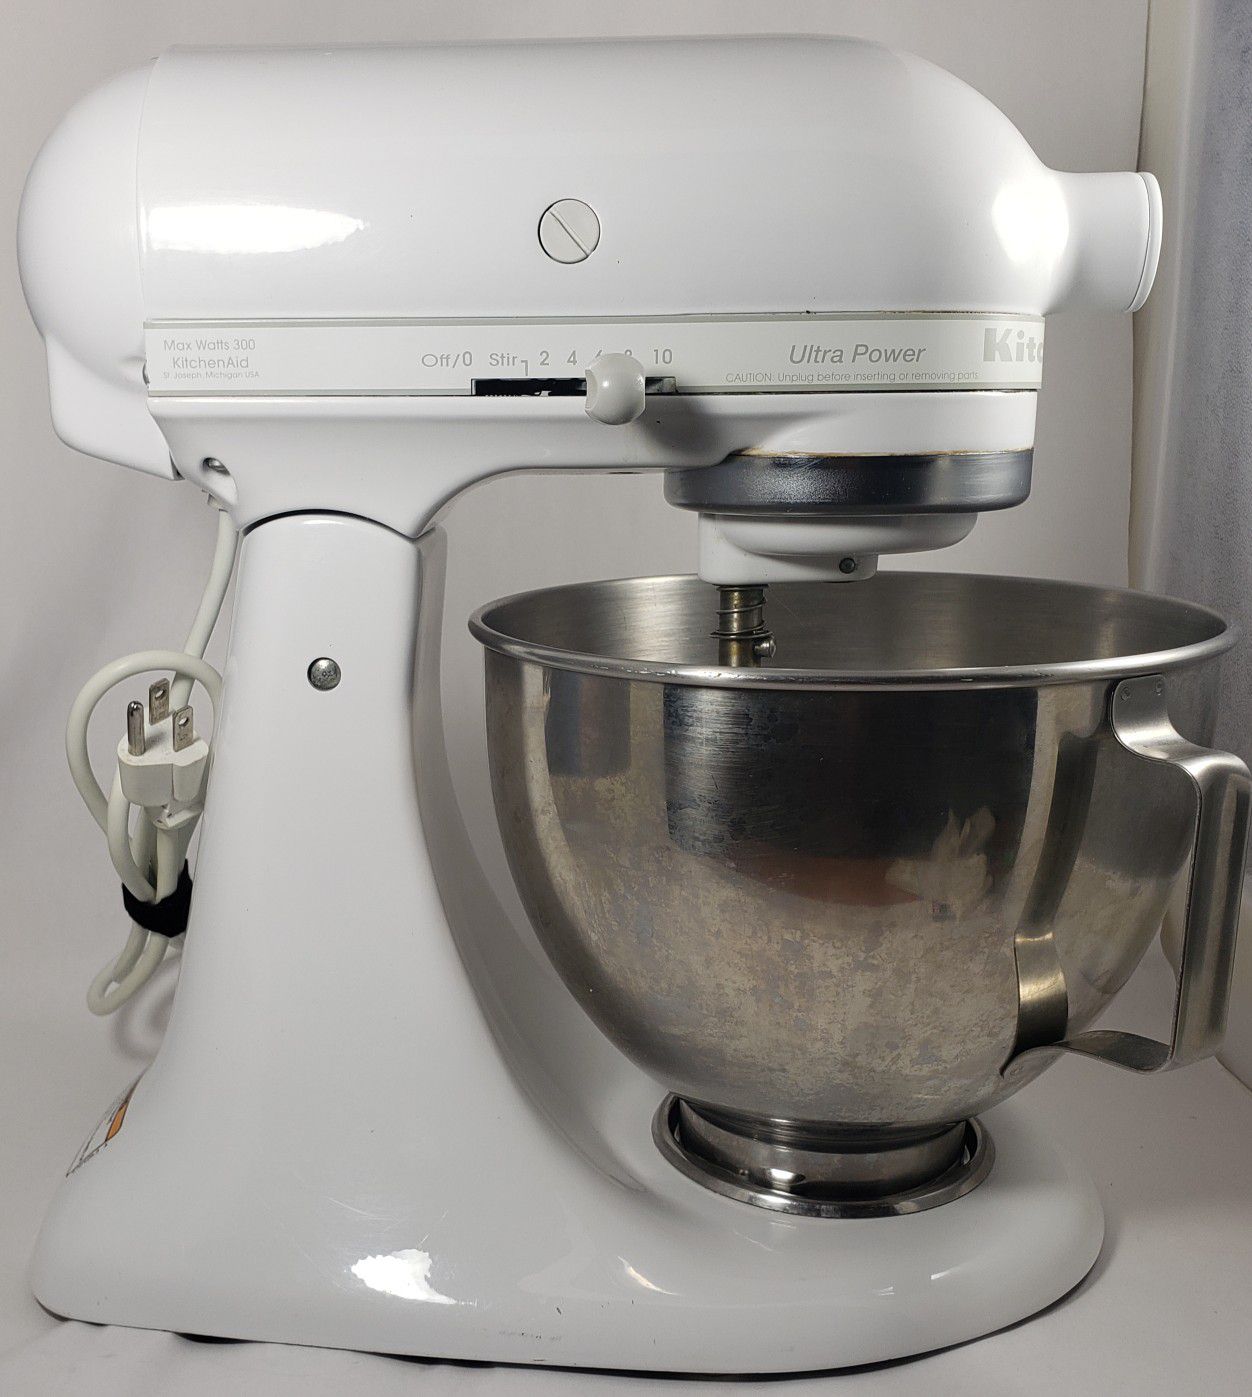 White KitchenAid KSM90 300W Ultra Power Stand Mixer tested and works